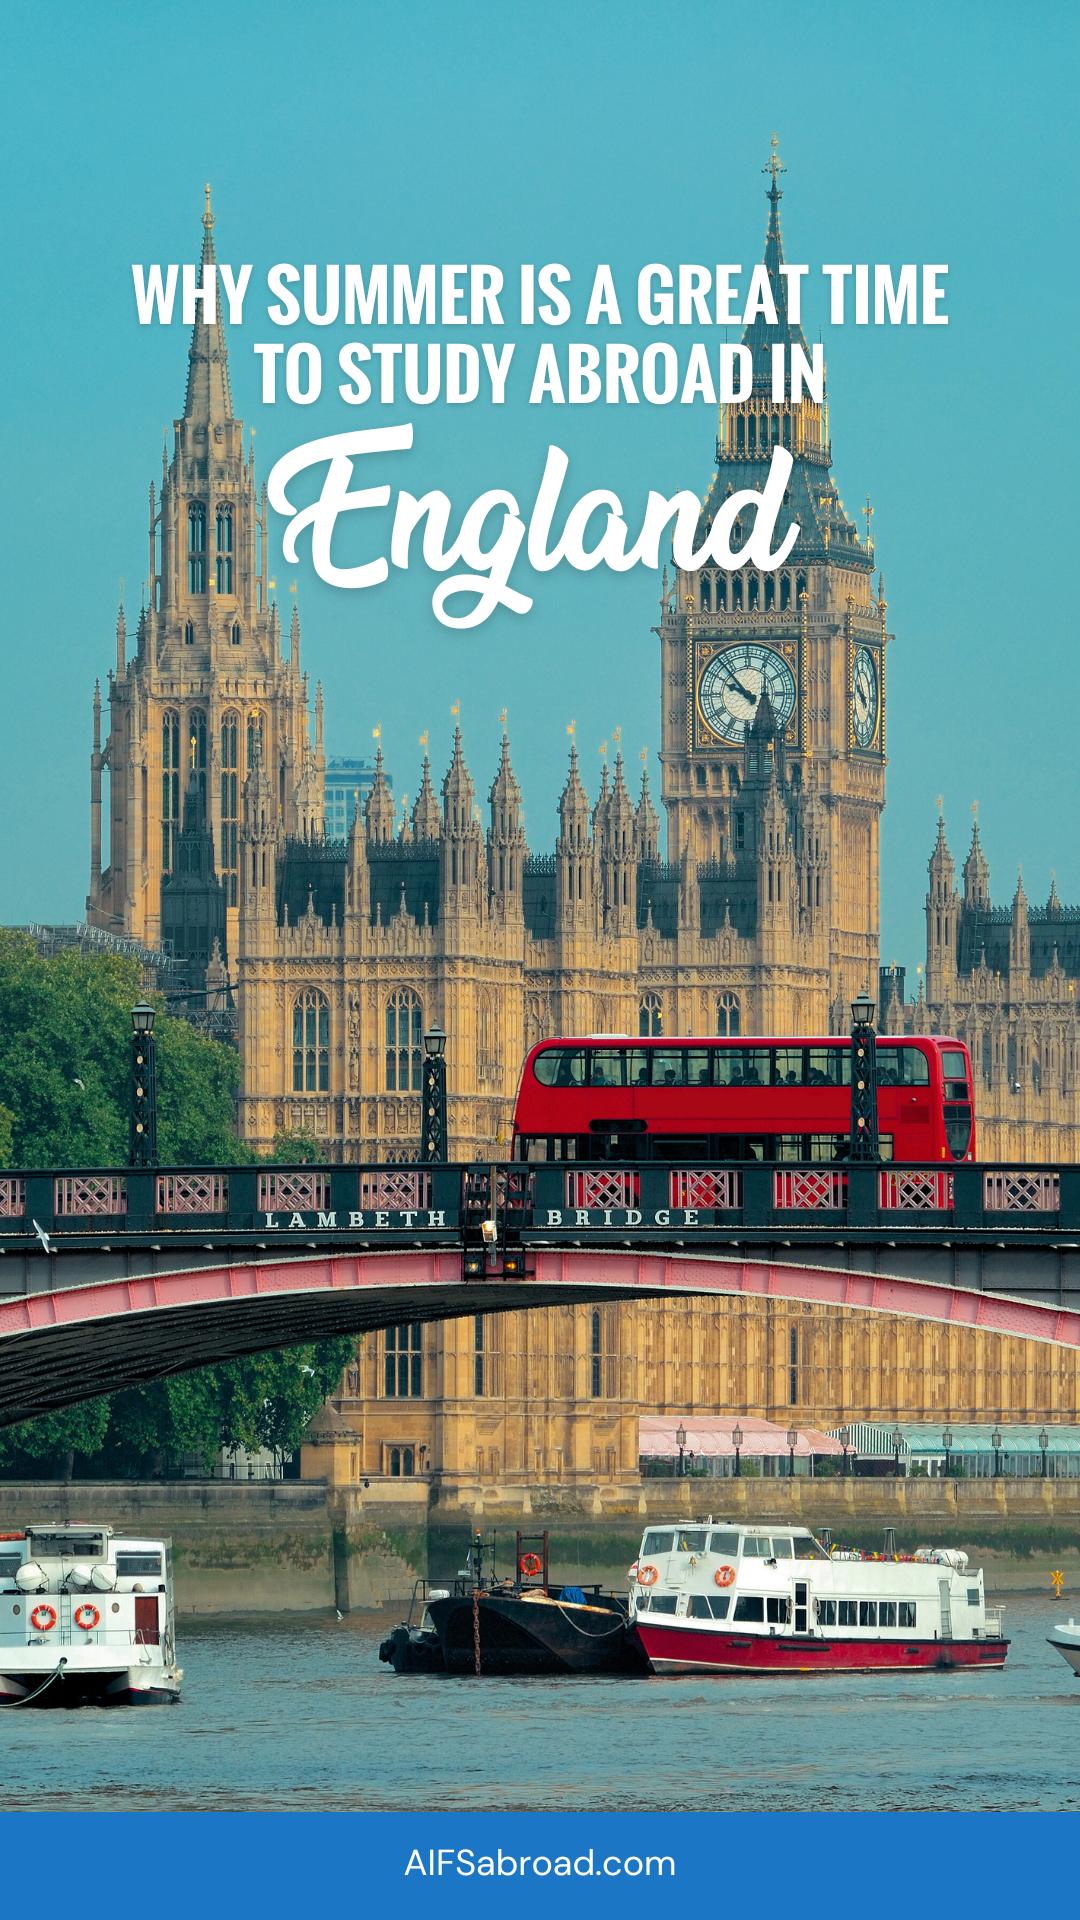 Pin Image - View of Big Ben and Parliament in London with text "Why Summer is a Great Time to Study Abroad in England" - AIFS Abroad